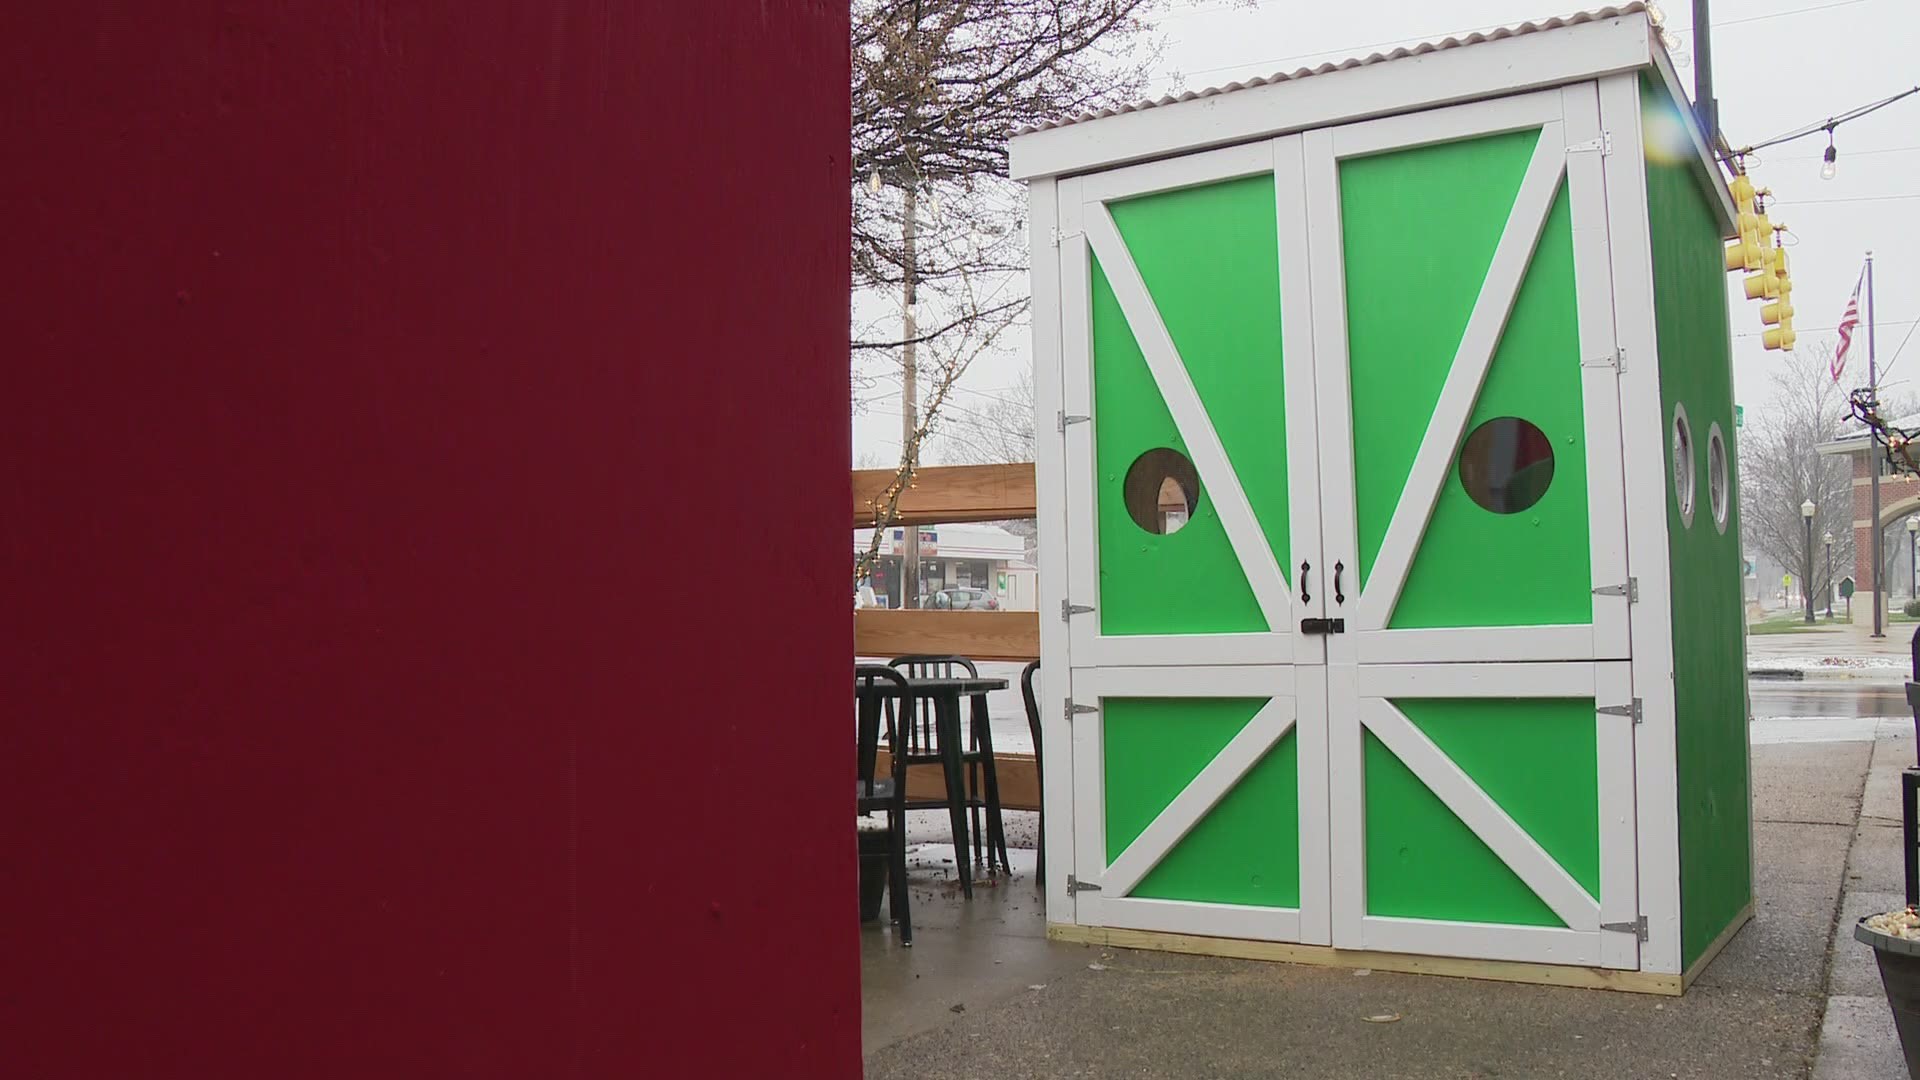 Brass Ring Brewery in Grand Rapids has created 'Beer Shanties,' allowing patrons to enjoy the indoor experience, outdoors, amid the recent COVID-19 shutdown.